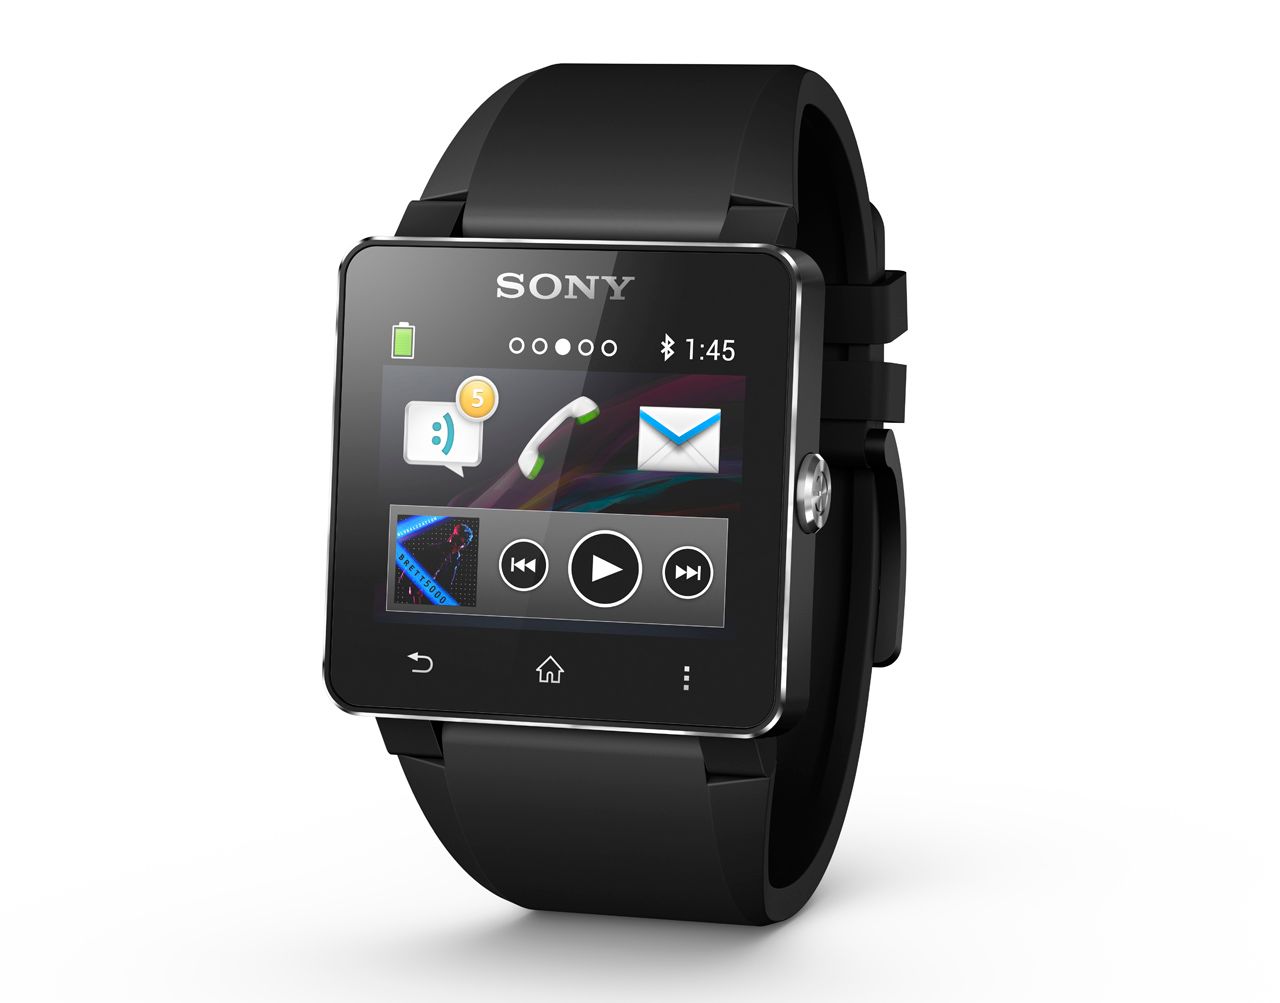 sony launches the smartwatch 2 offering nfc waterproofing and android feel image 1